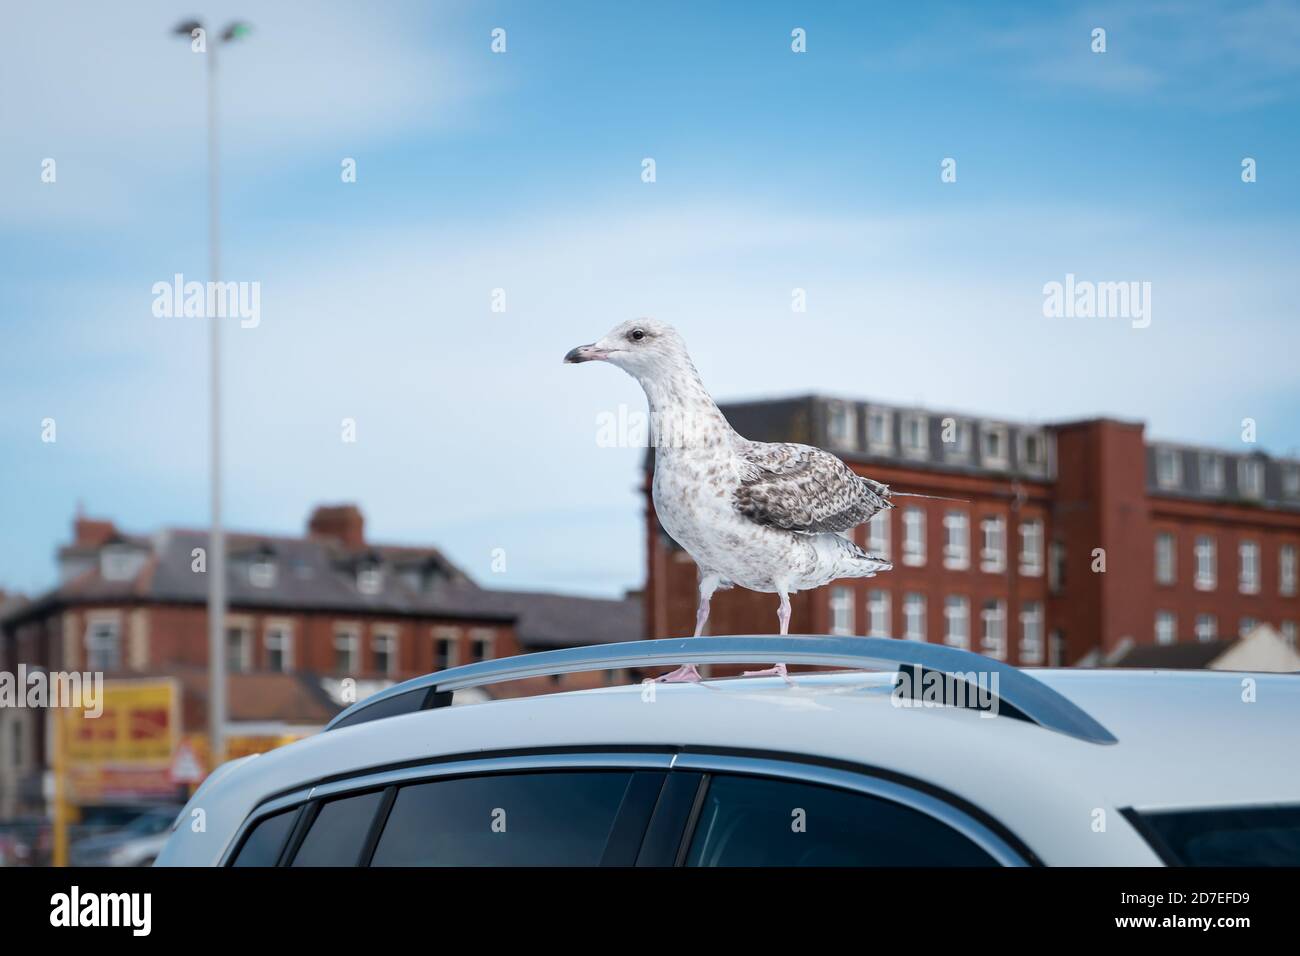 A pest juvenile seagull on top of a car roof Stock Photo